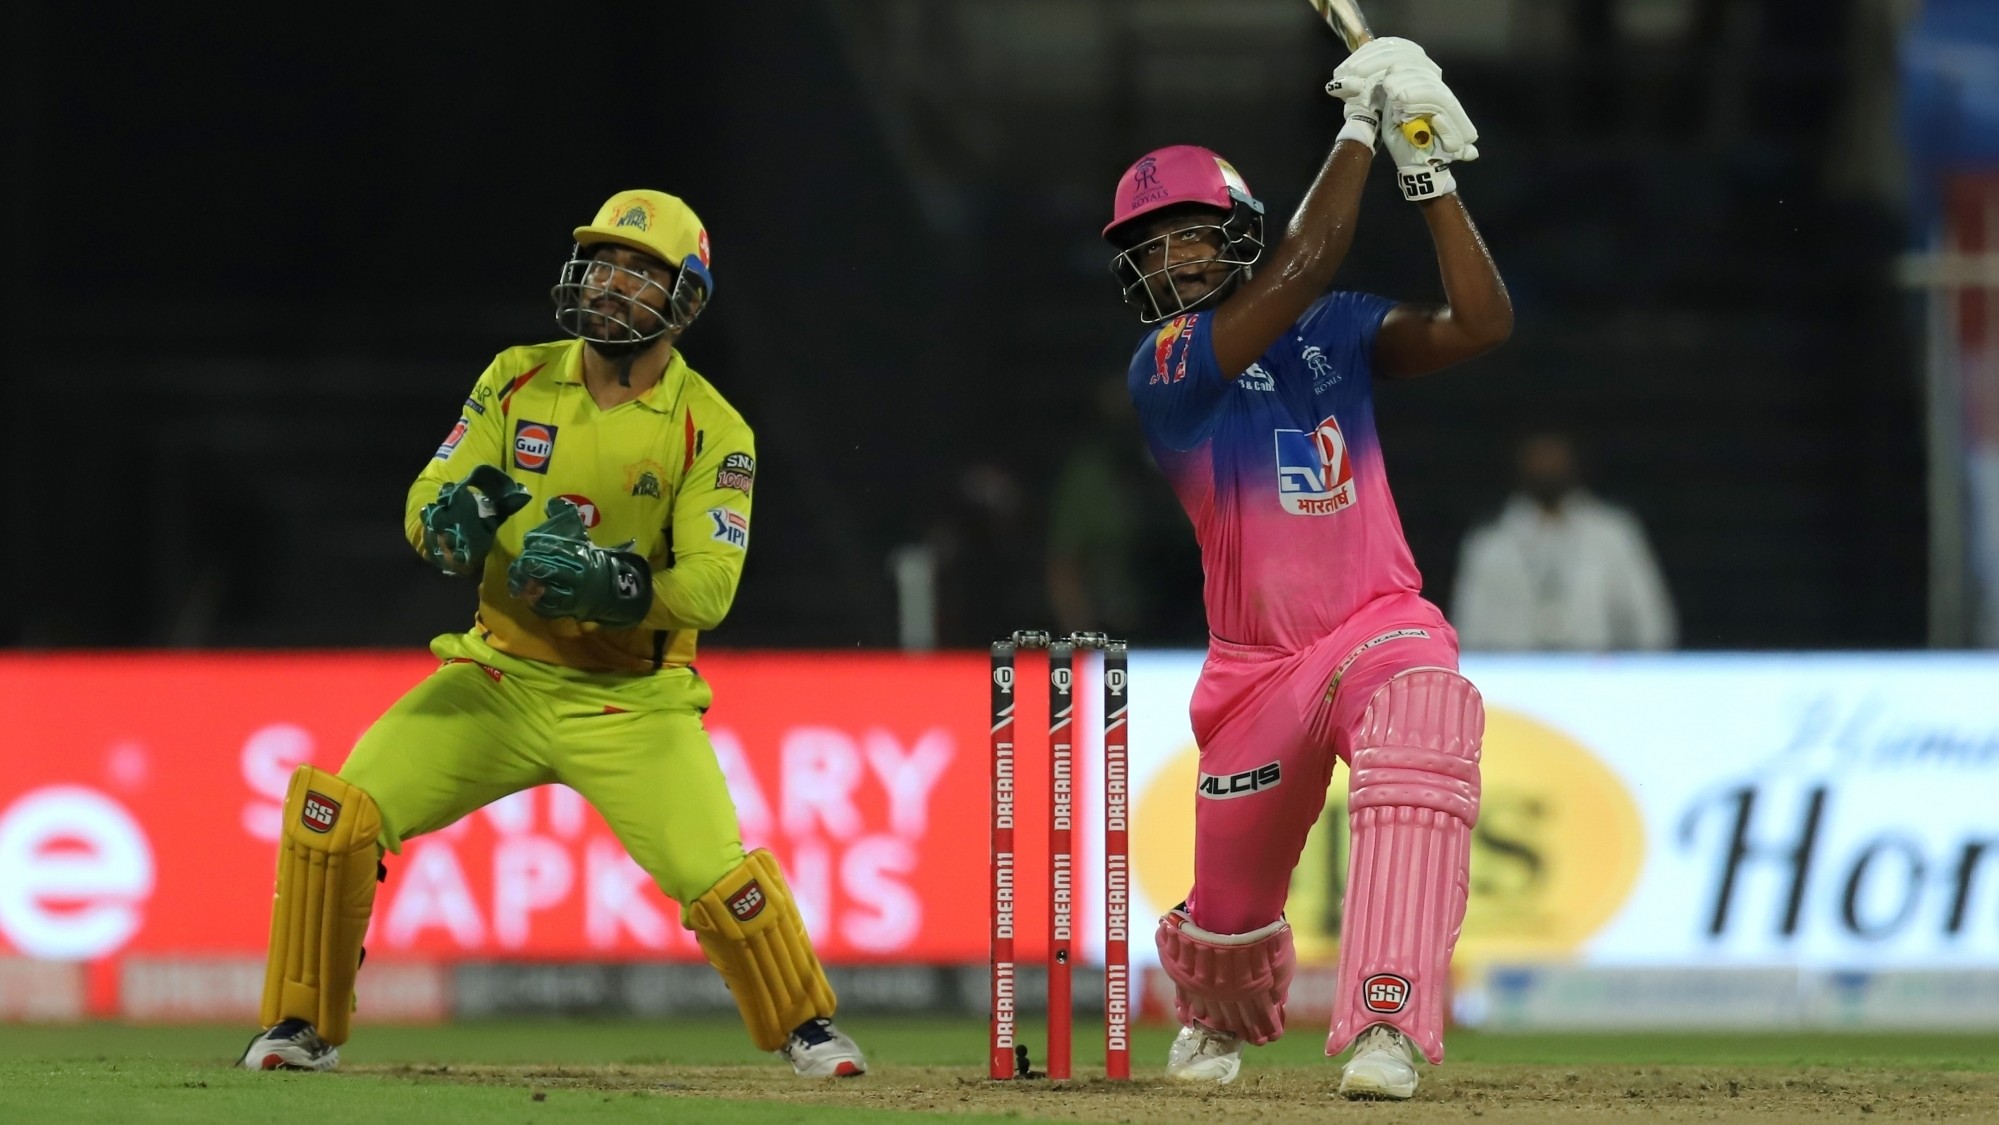 IPL 2020: Match 37, CSK v RR - Statistical Preview of the Match 